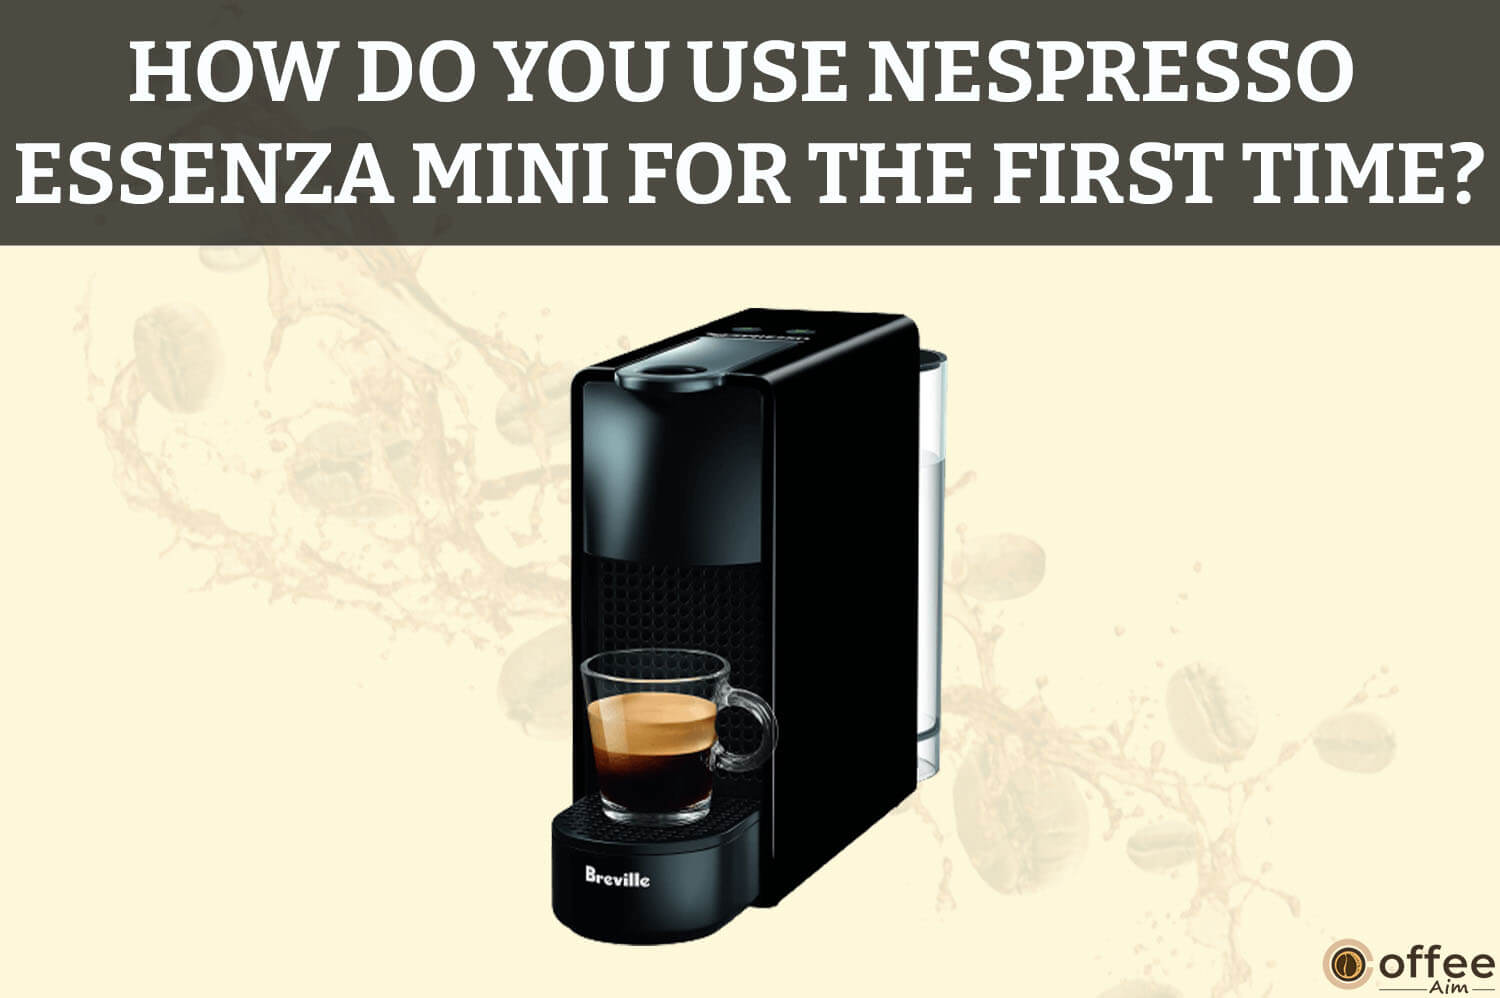 How-Do-You-Use-Nespresso-Essenza-Mini-For-The-First-Time